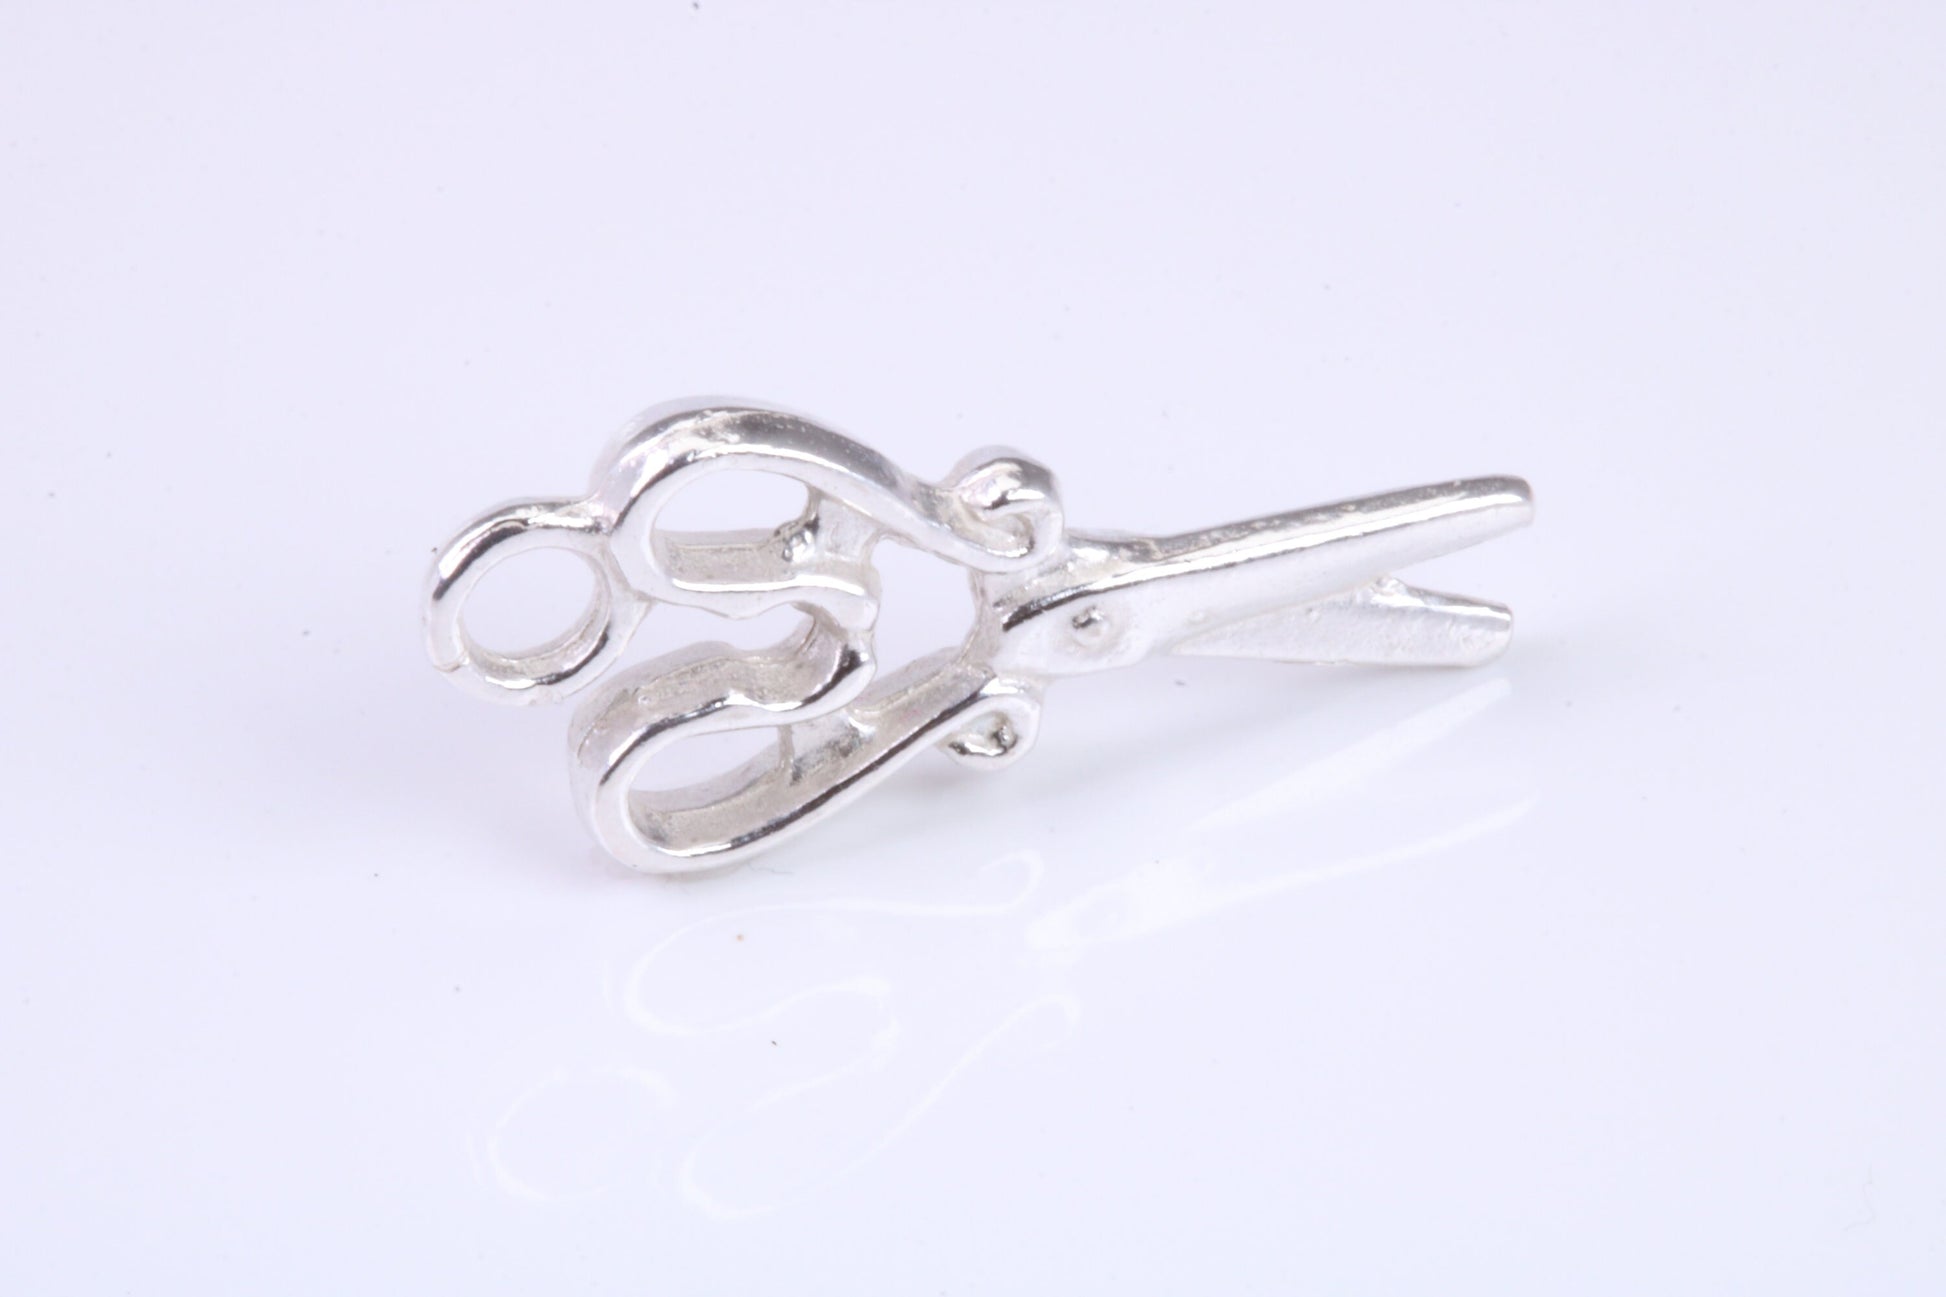 Scissor Charm, Traditional Charm, Made from Solid 925 Grade Sterling Silver, Complete with Attachment Link